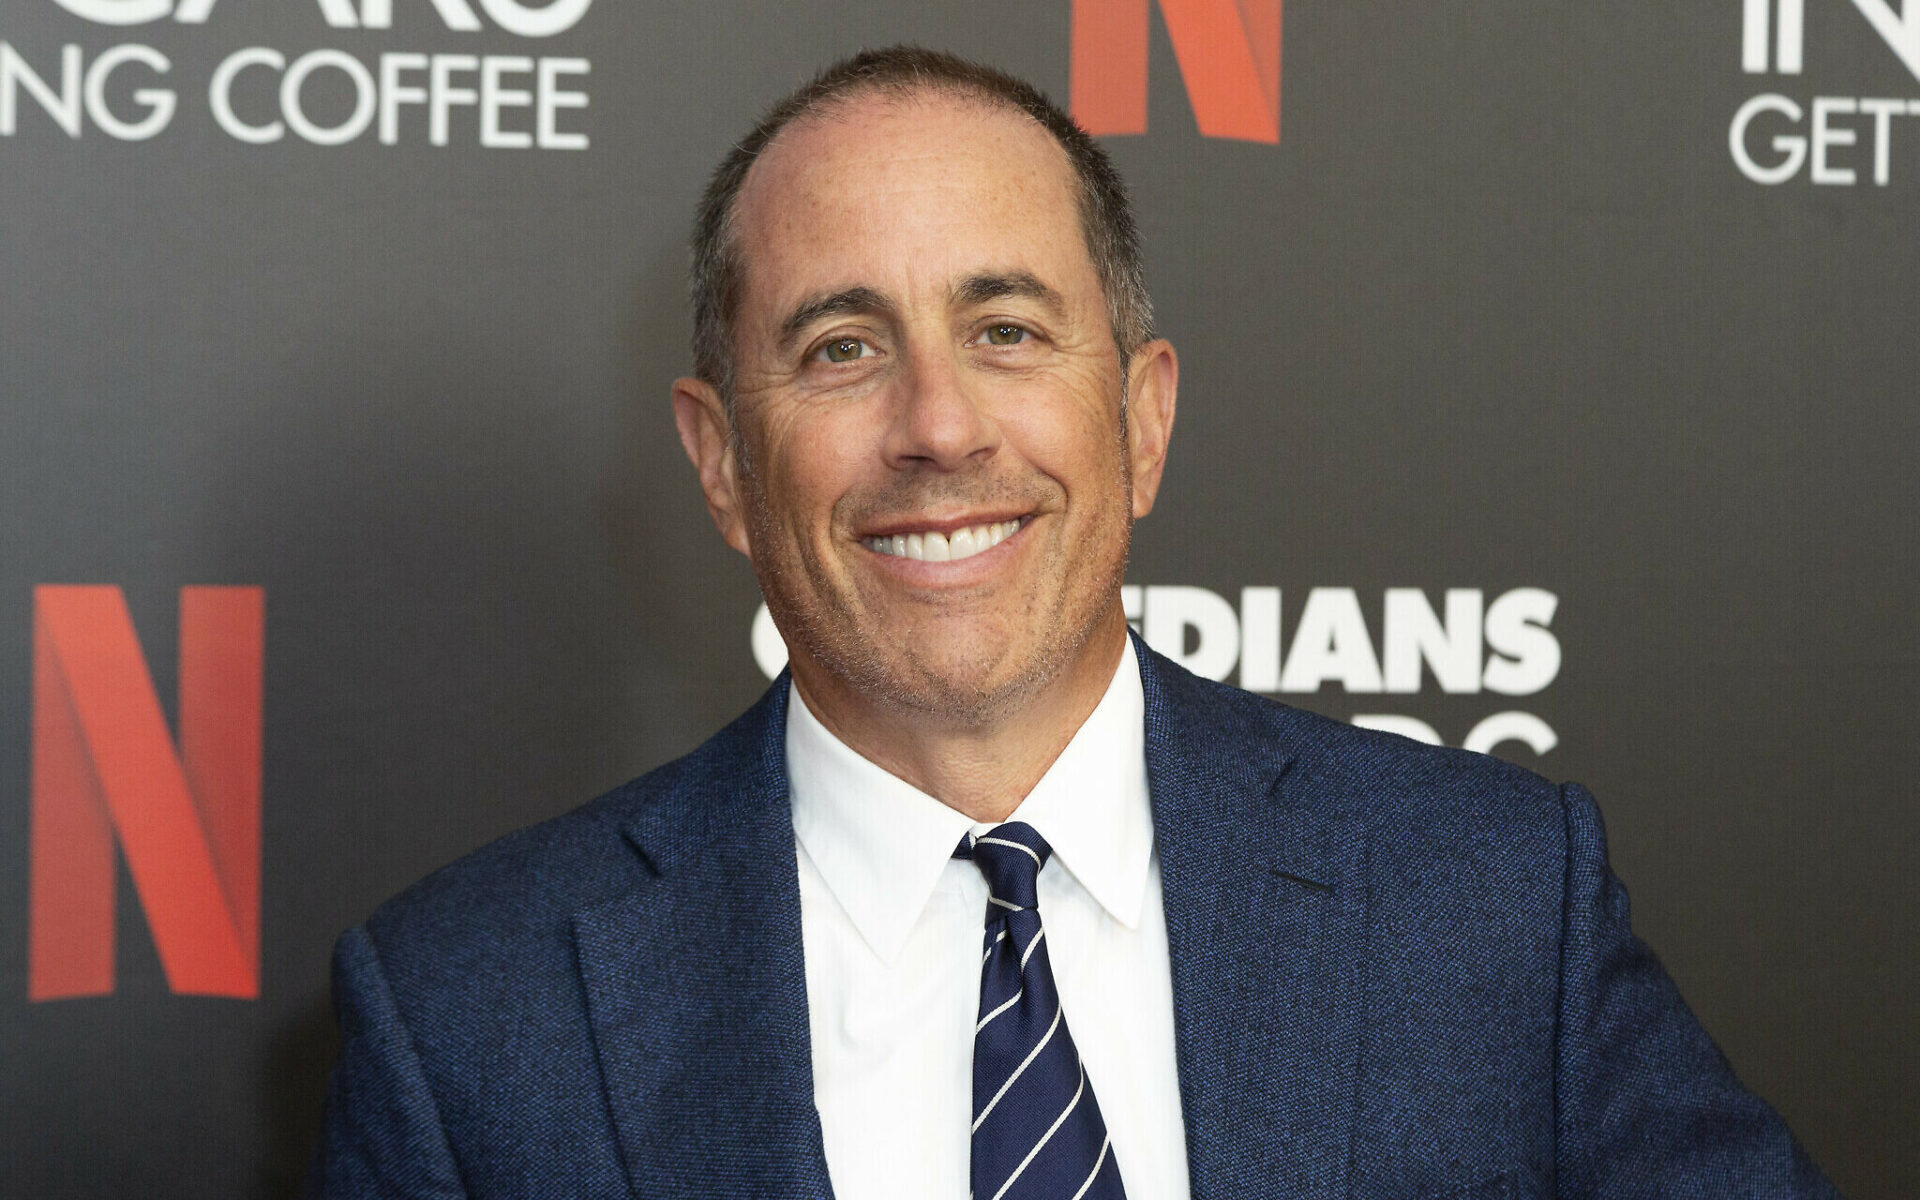 Jerry Seinfeld’s Netflix Stand-up Special: 23 Hours To Kill Release Date, & Other Updates cover